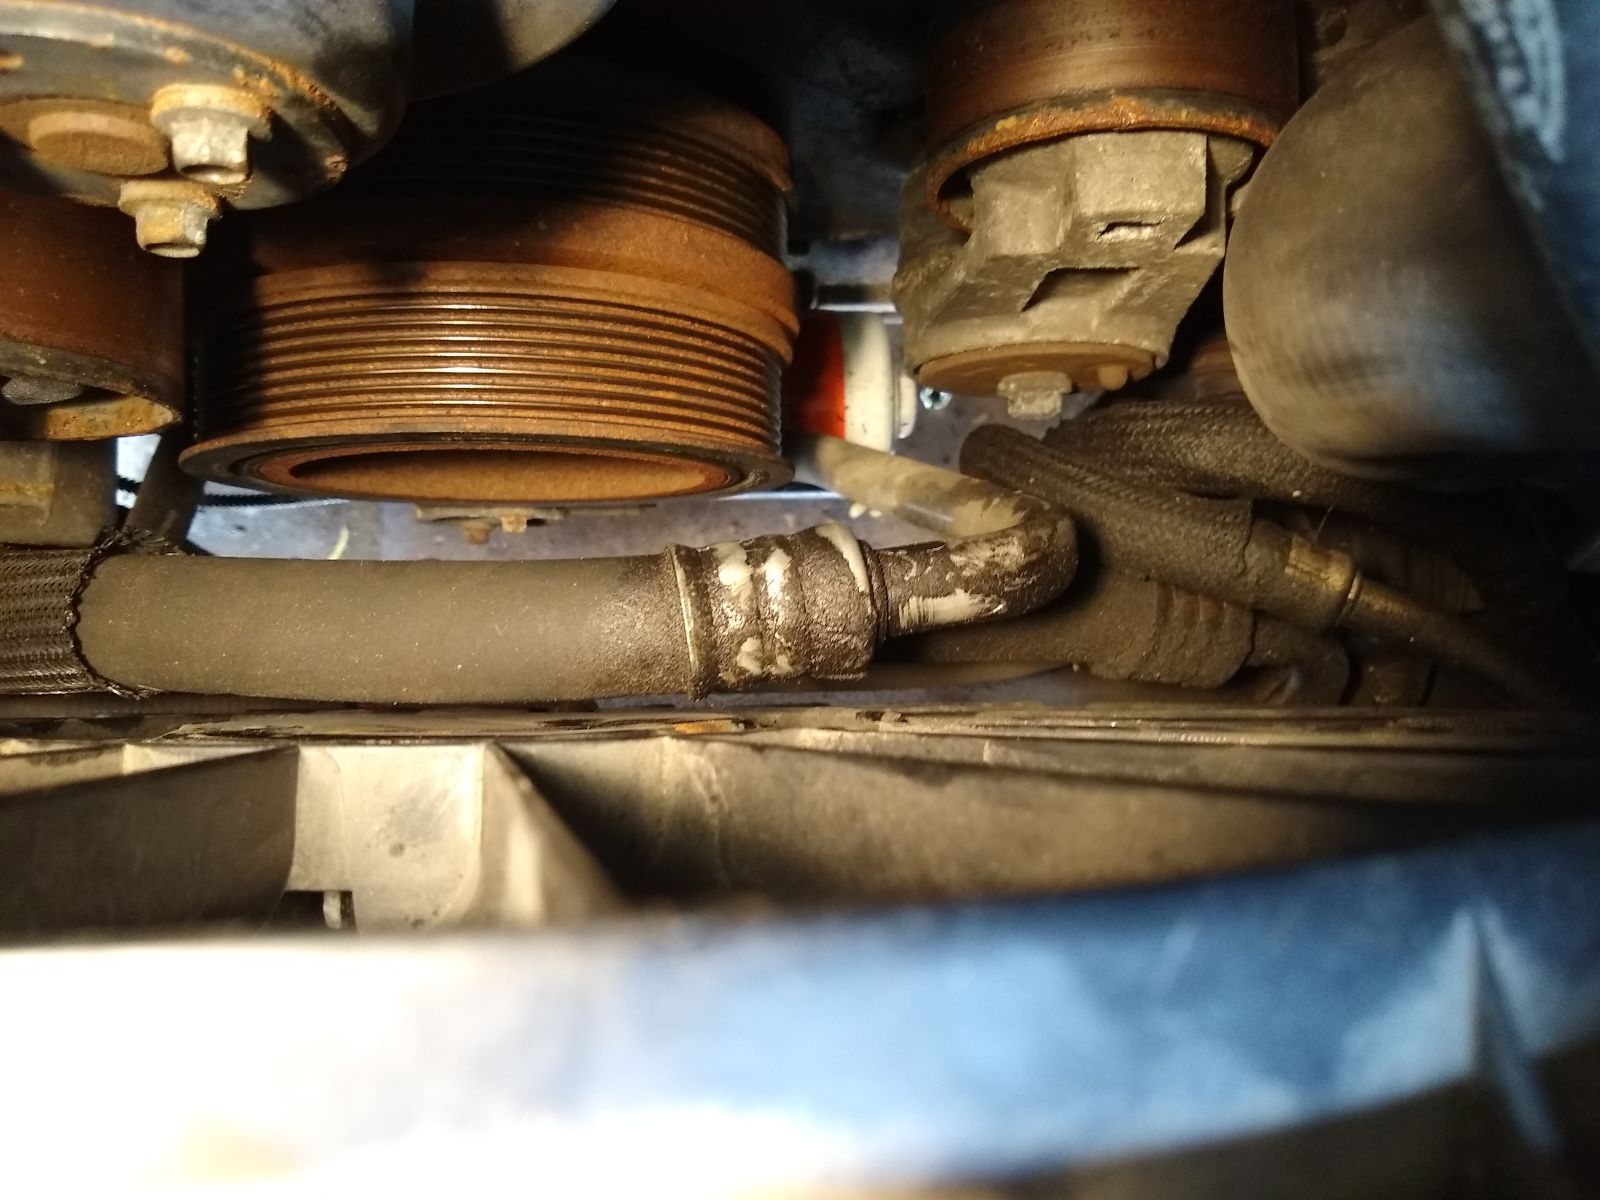 This slight wetness on the hose seems to indicate a weeping hose, but all of the other stuff around it also being gross might mean I had coolant leaking there?